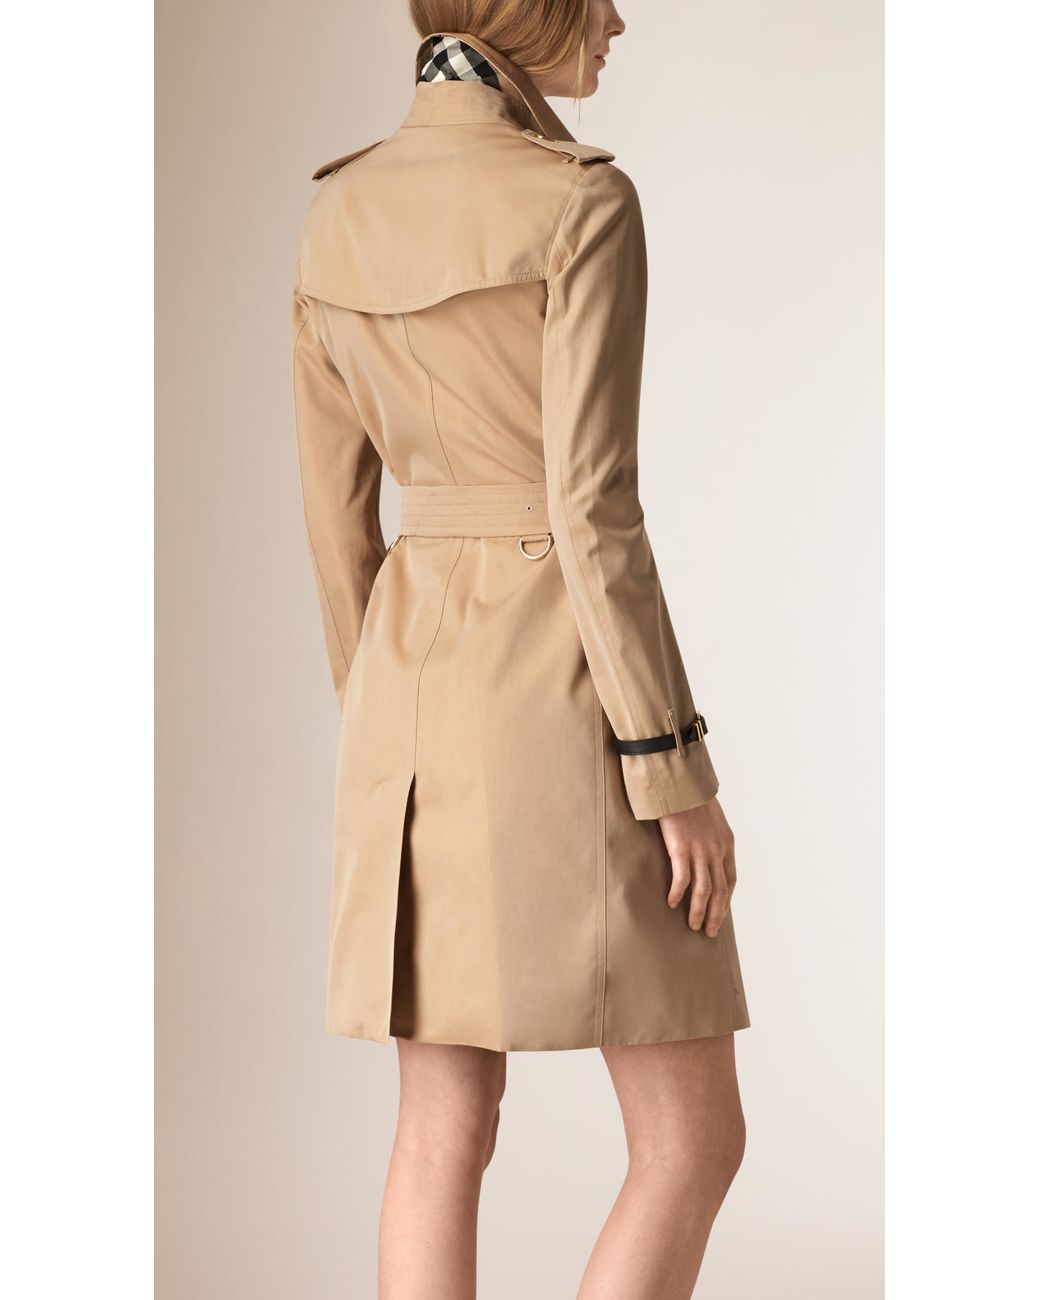 Burberry Metal Button Detail Cotton Gabardine Trench Coat in Natural | Lyst